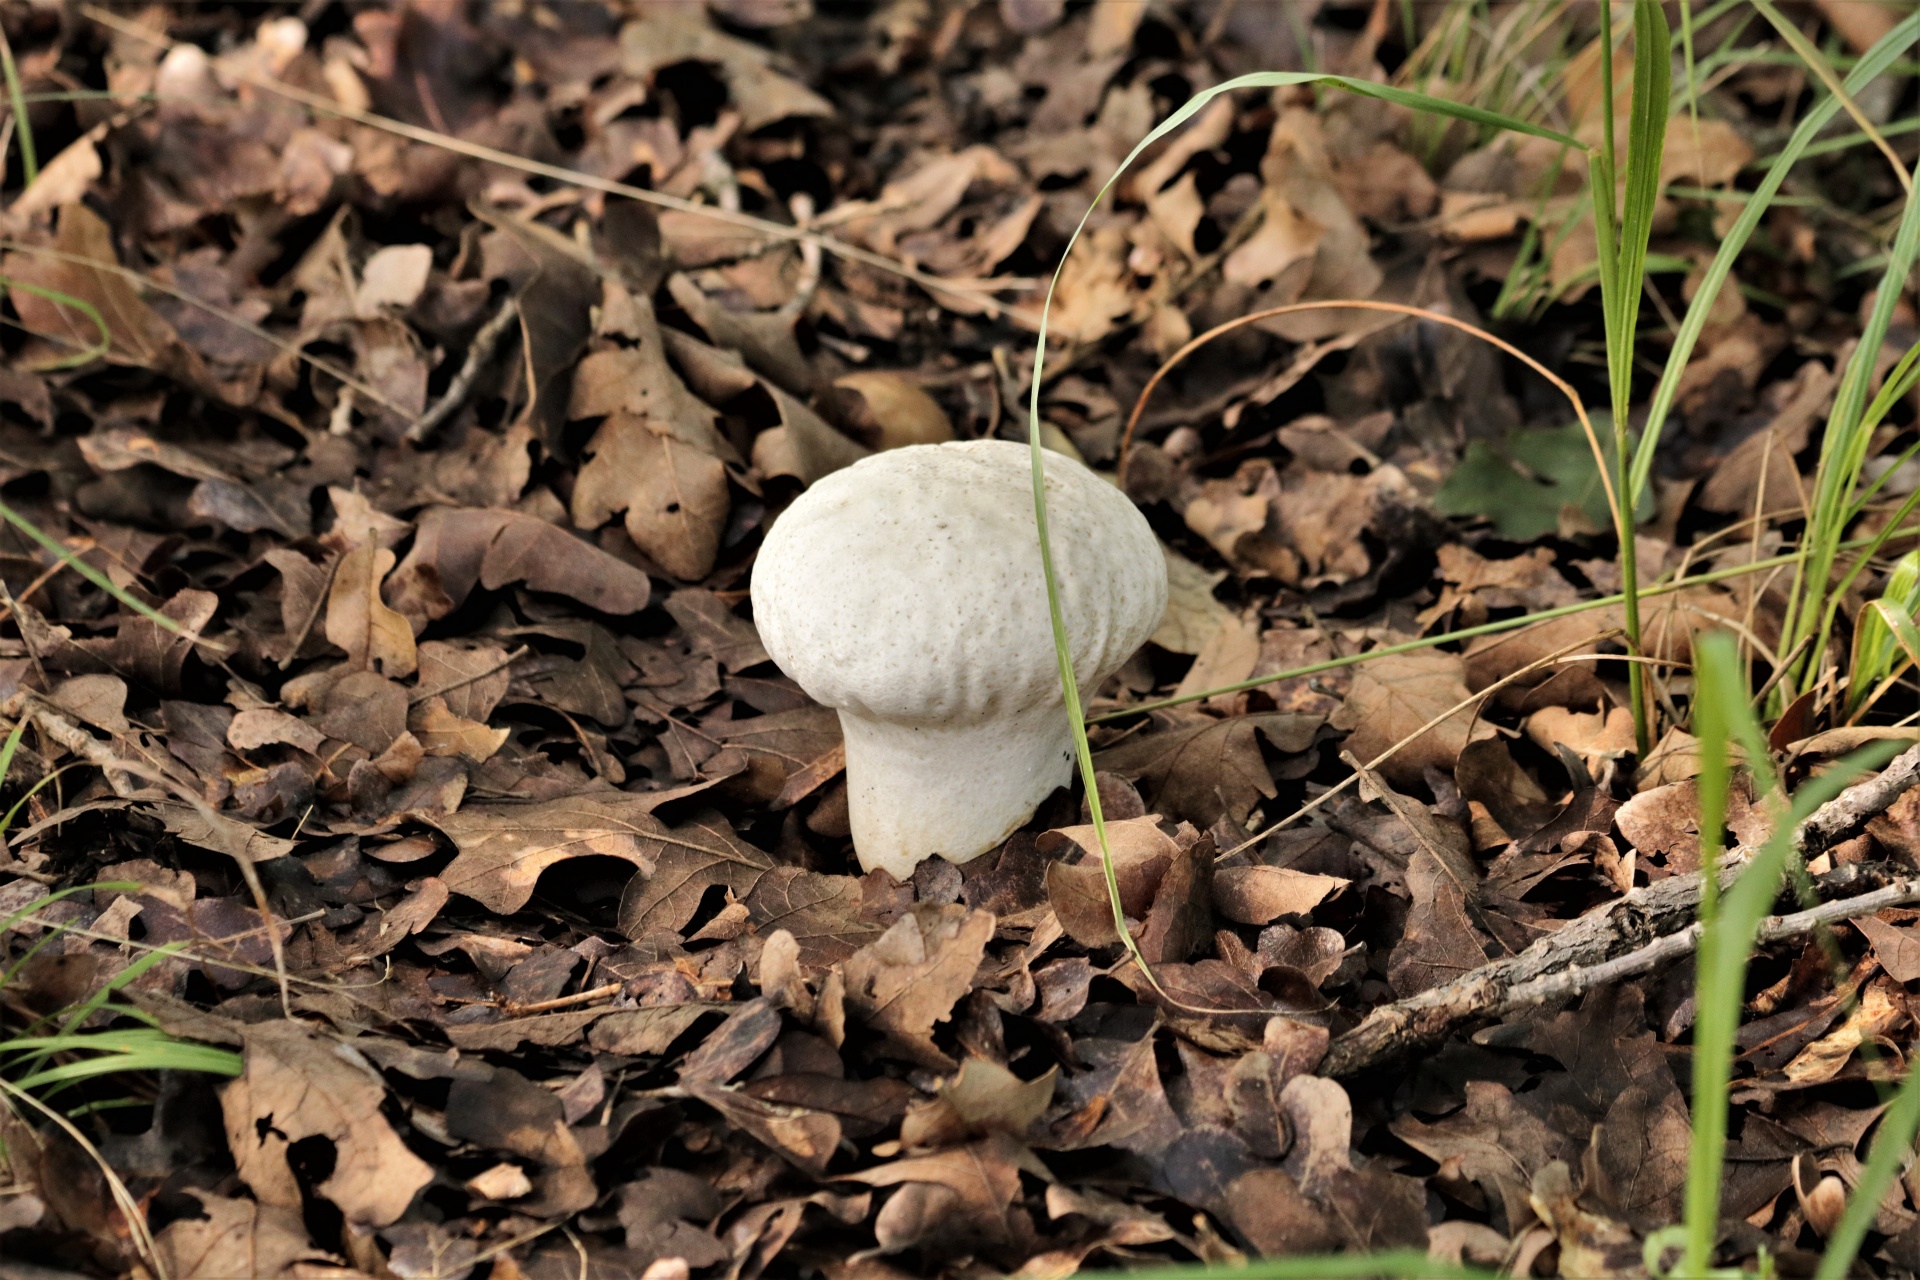 A common puffball mushroom growing in the brown leaves of early spring.